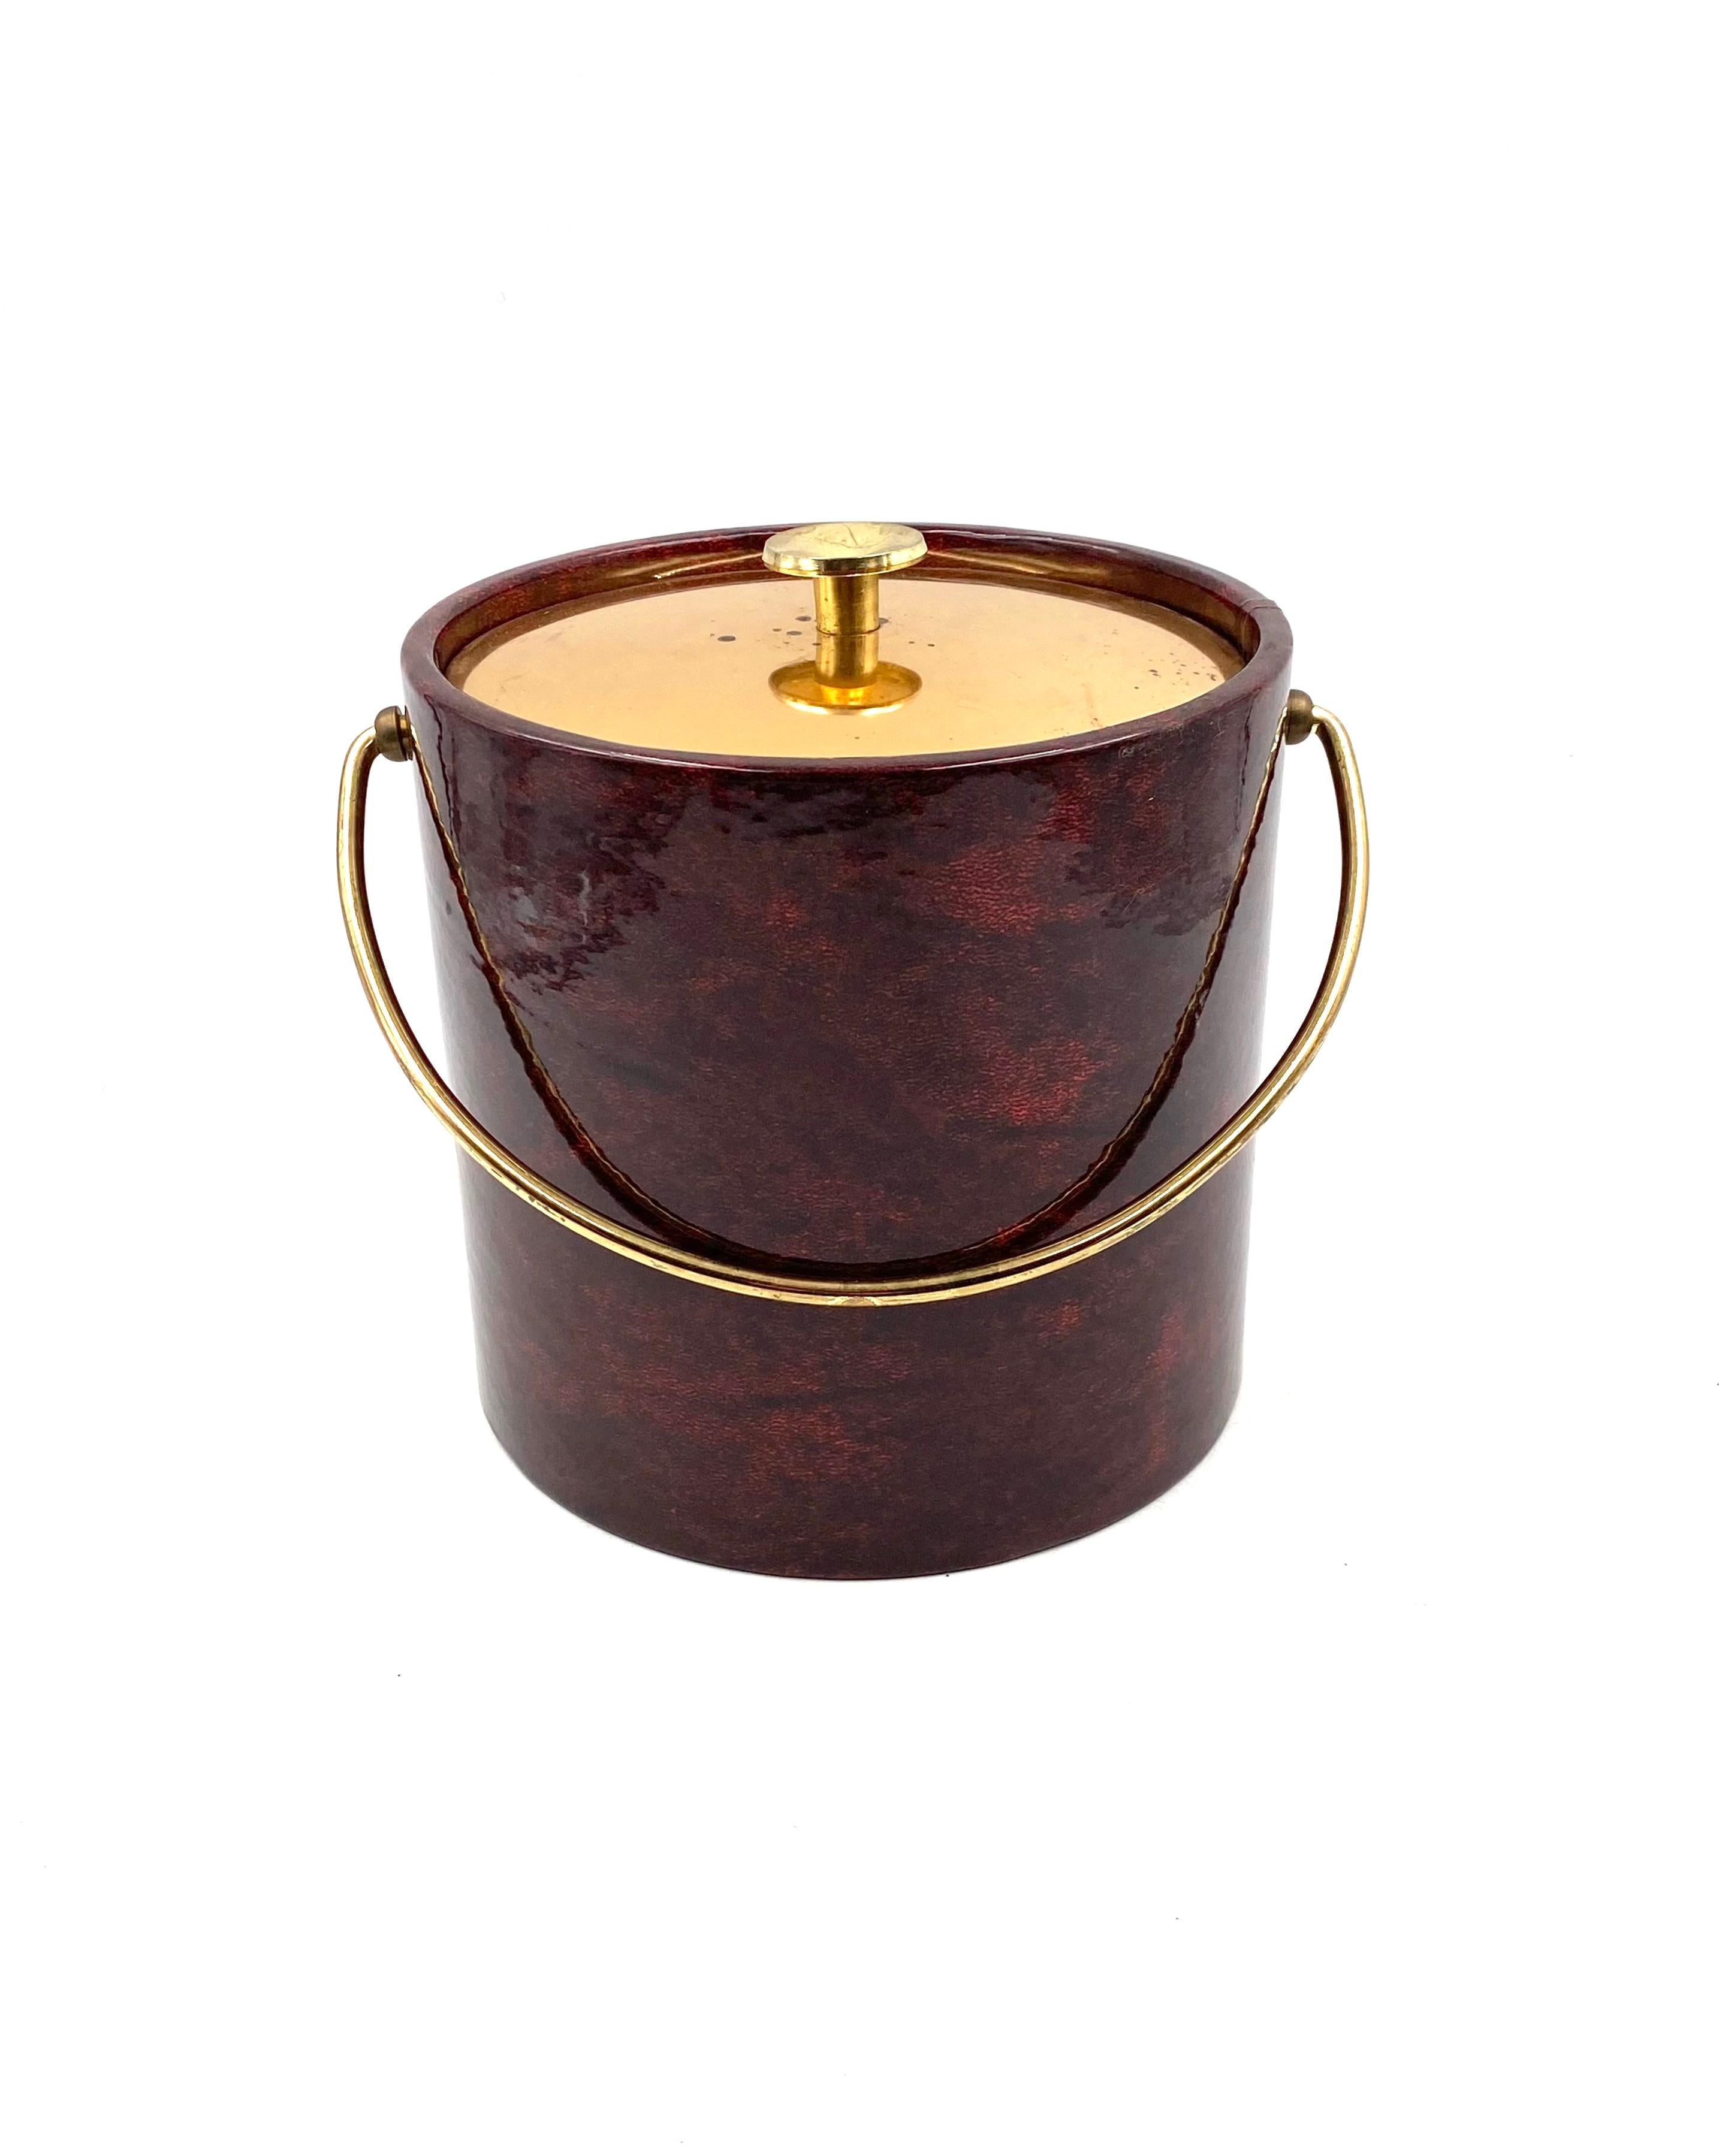 Metal Aldo Tura, Brass and red Parchment cooler / Ice bucket, Italy 1960s For Sale